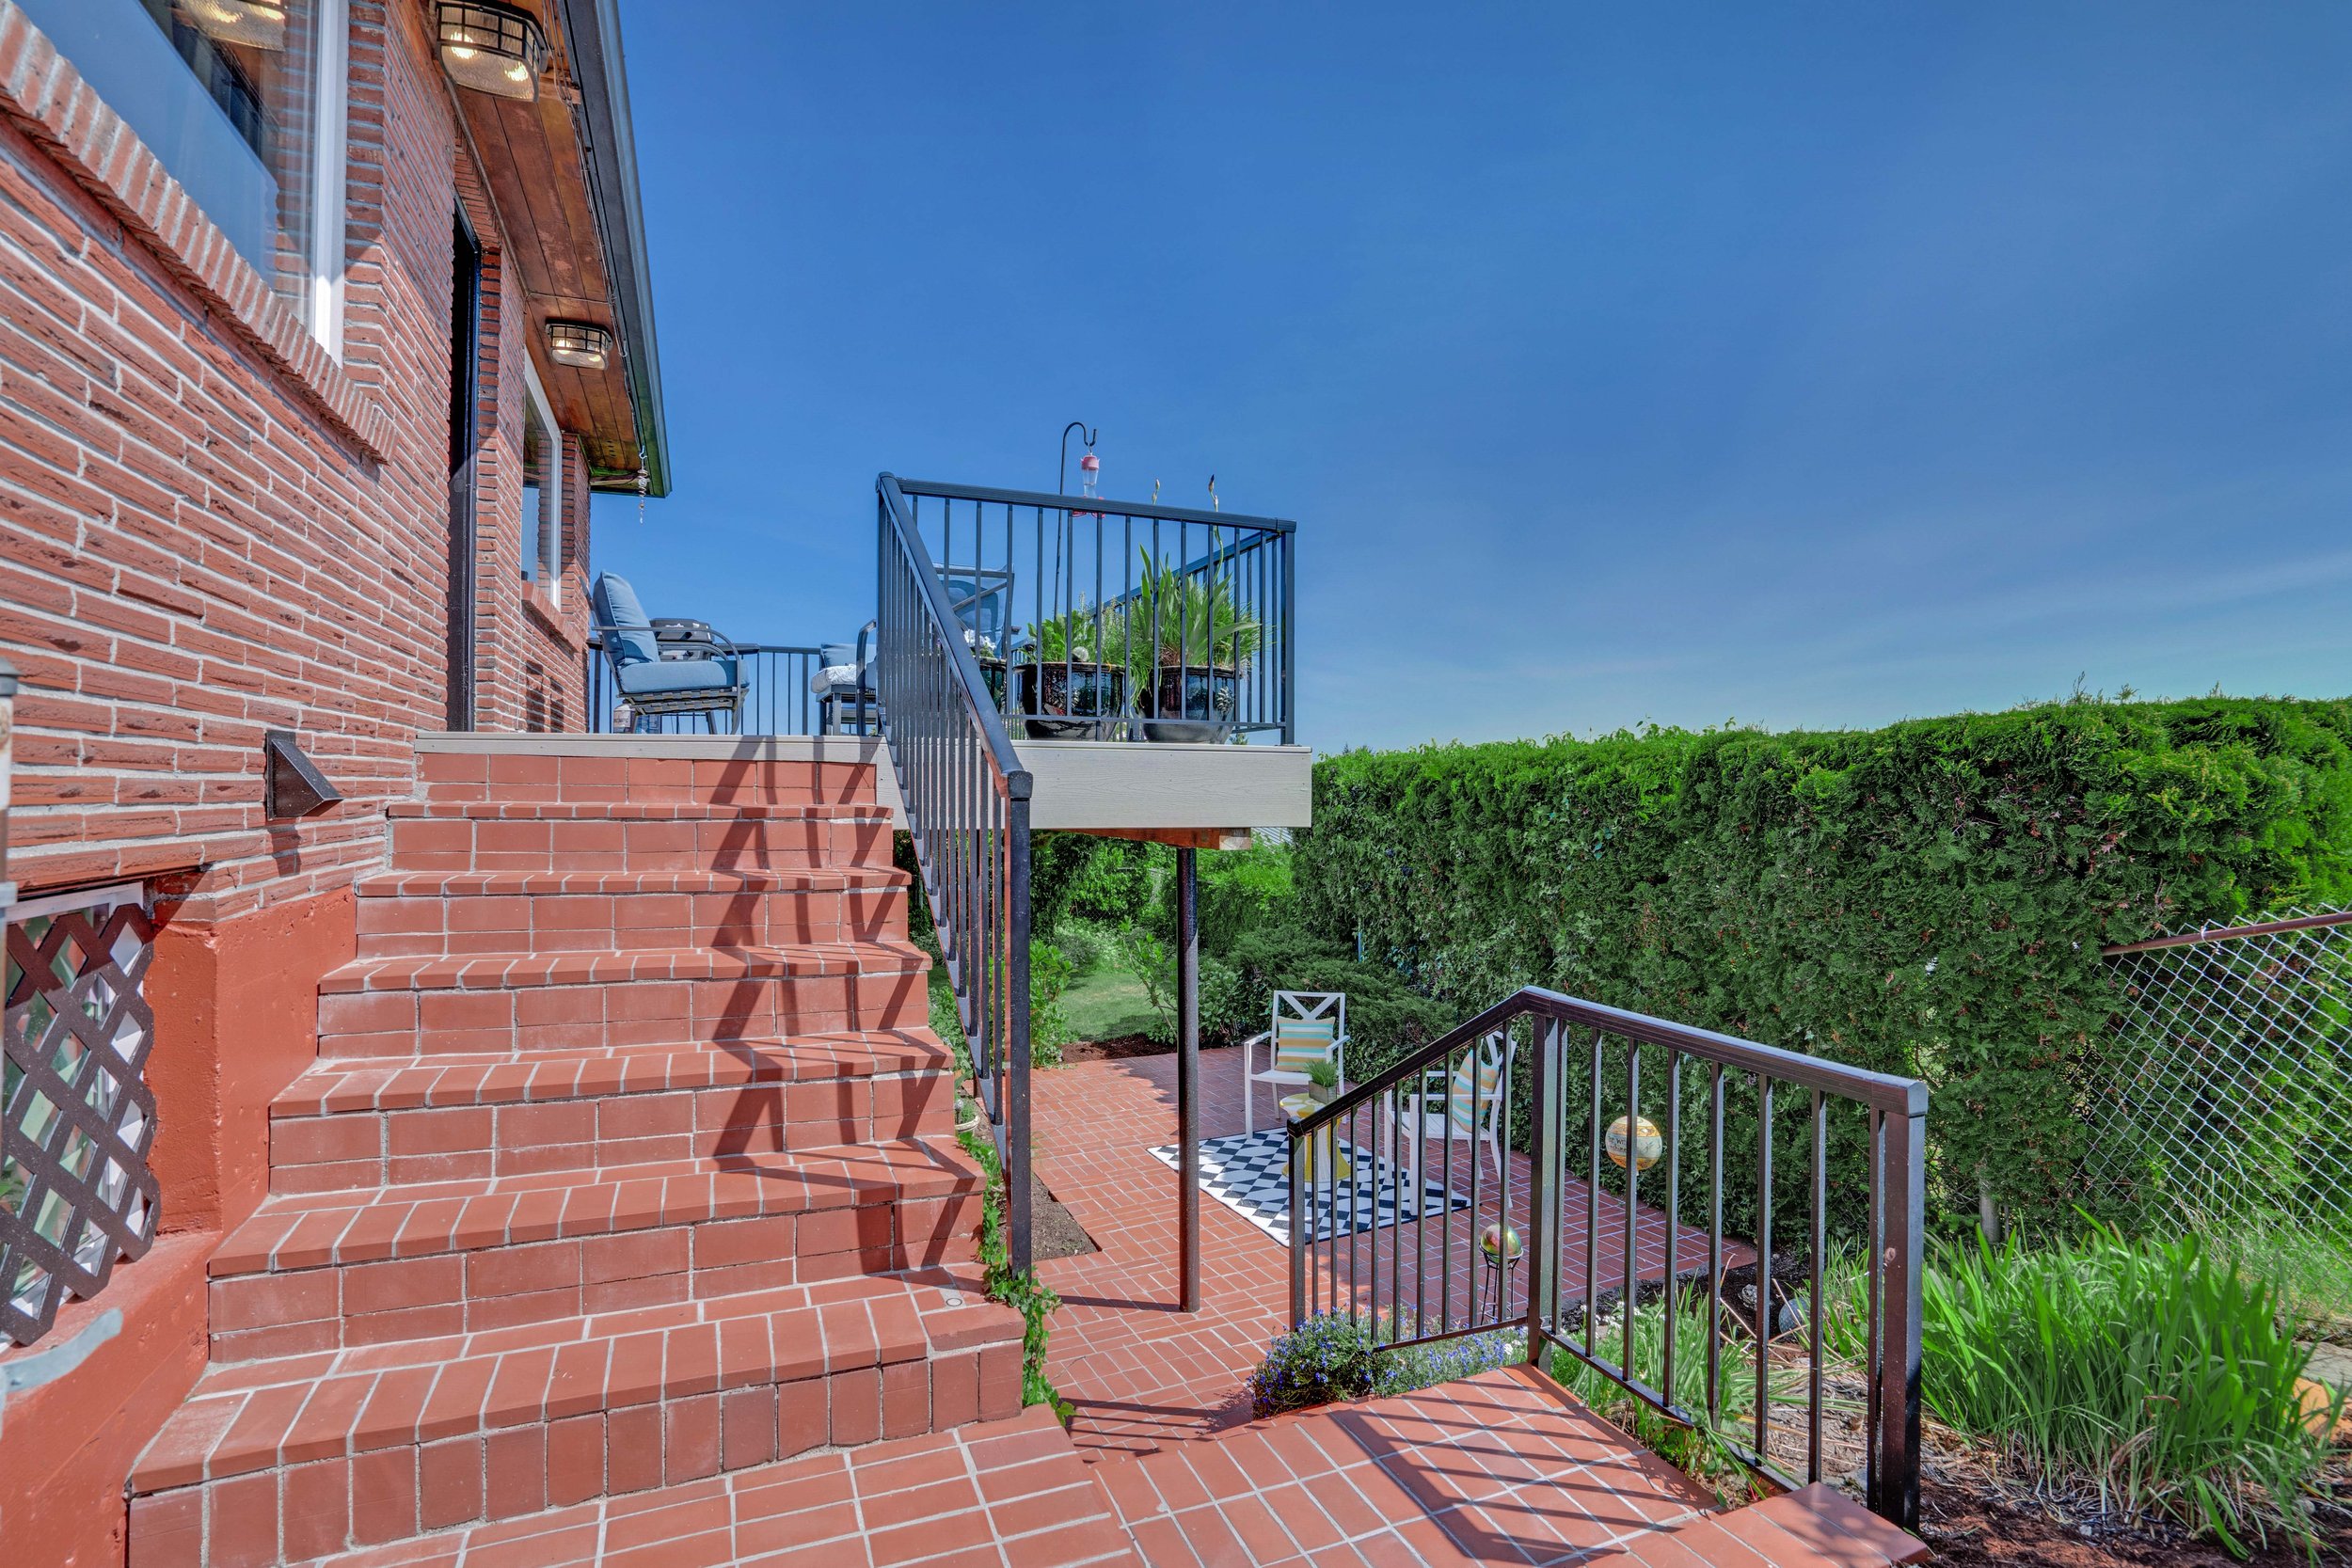 Stairs from Deck to Patio Hale St View Home.jpg